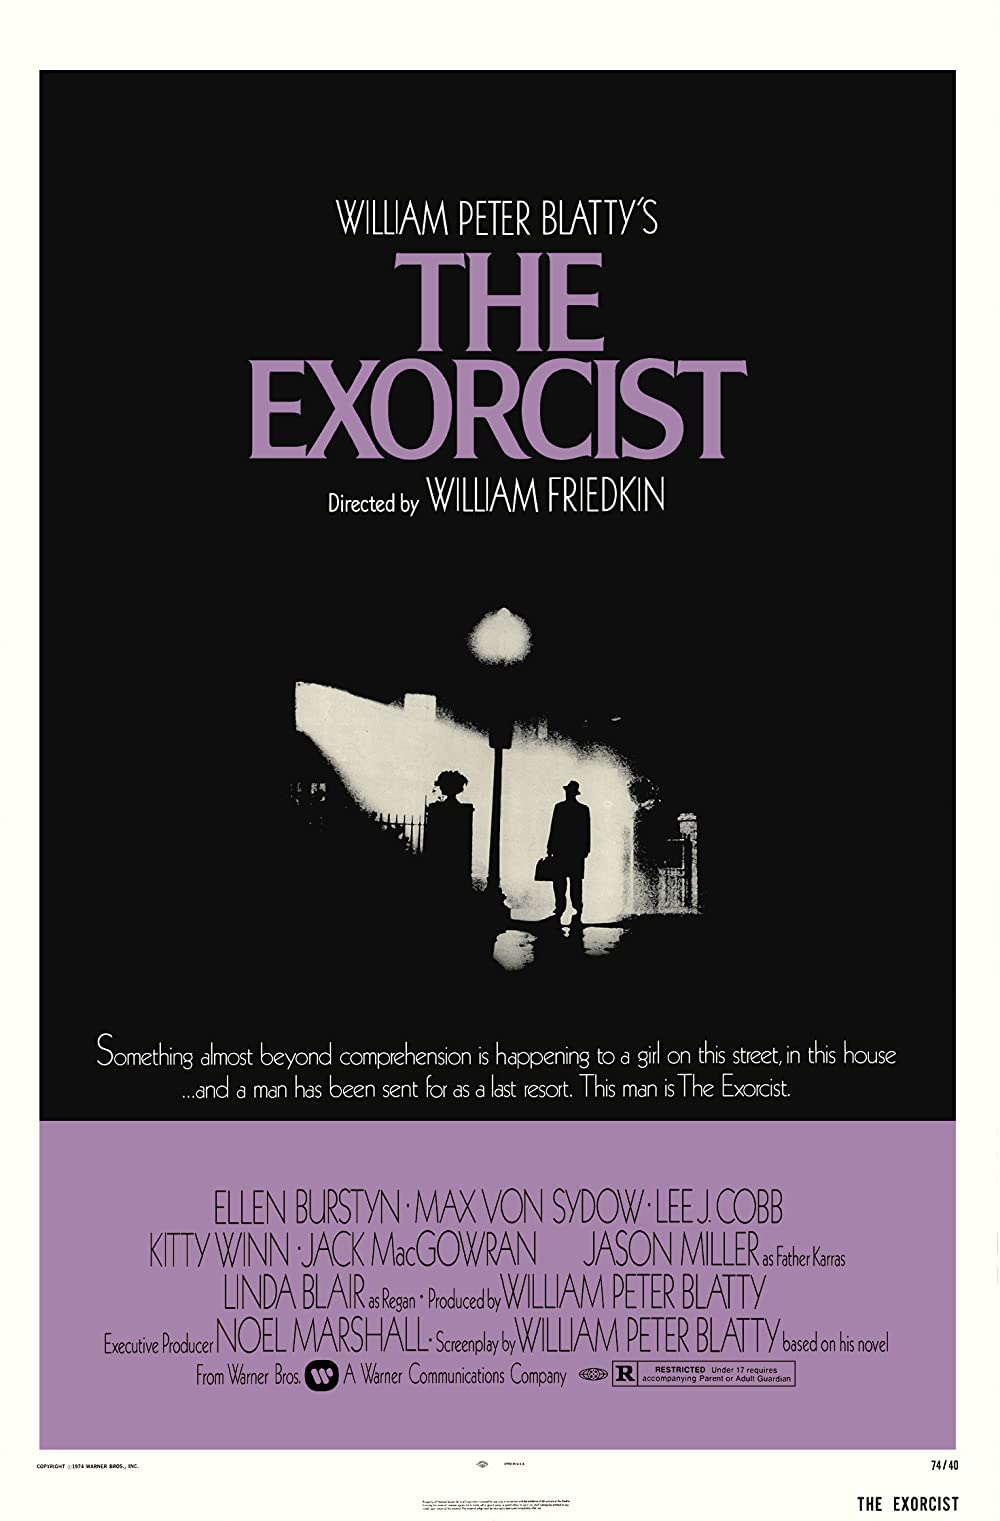 THE EXORCIST 50th Anniversary